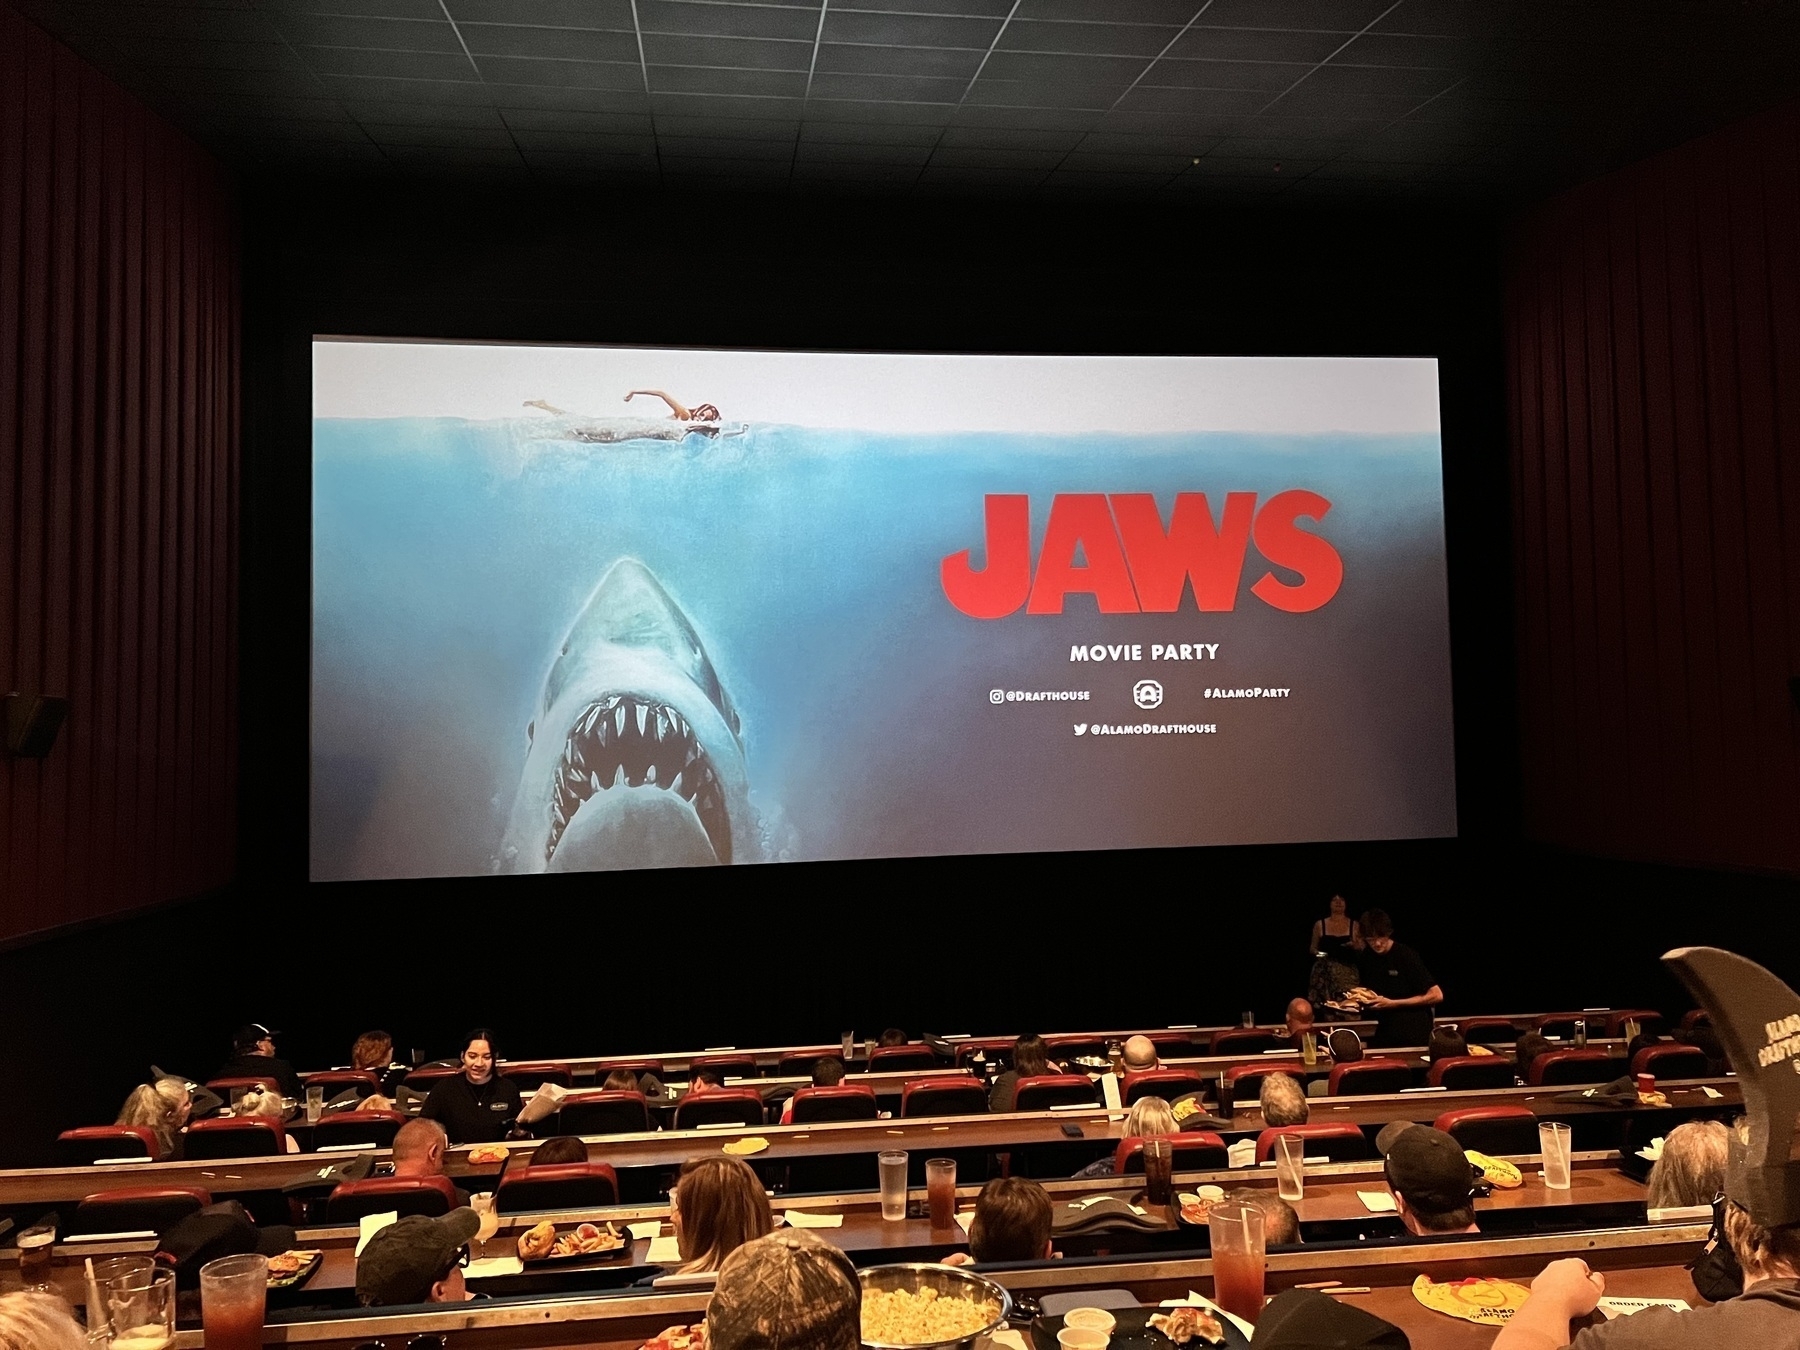 JAWS movie in a theater